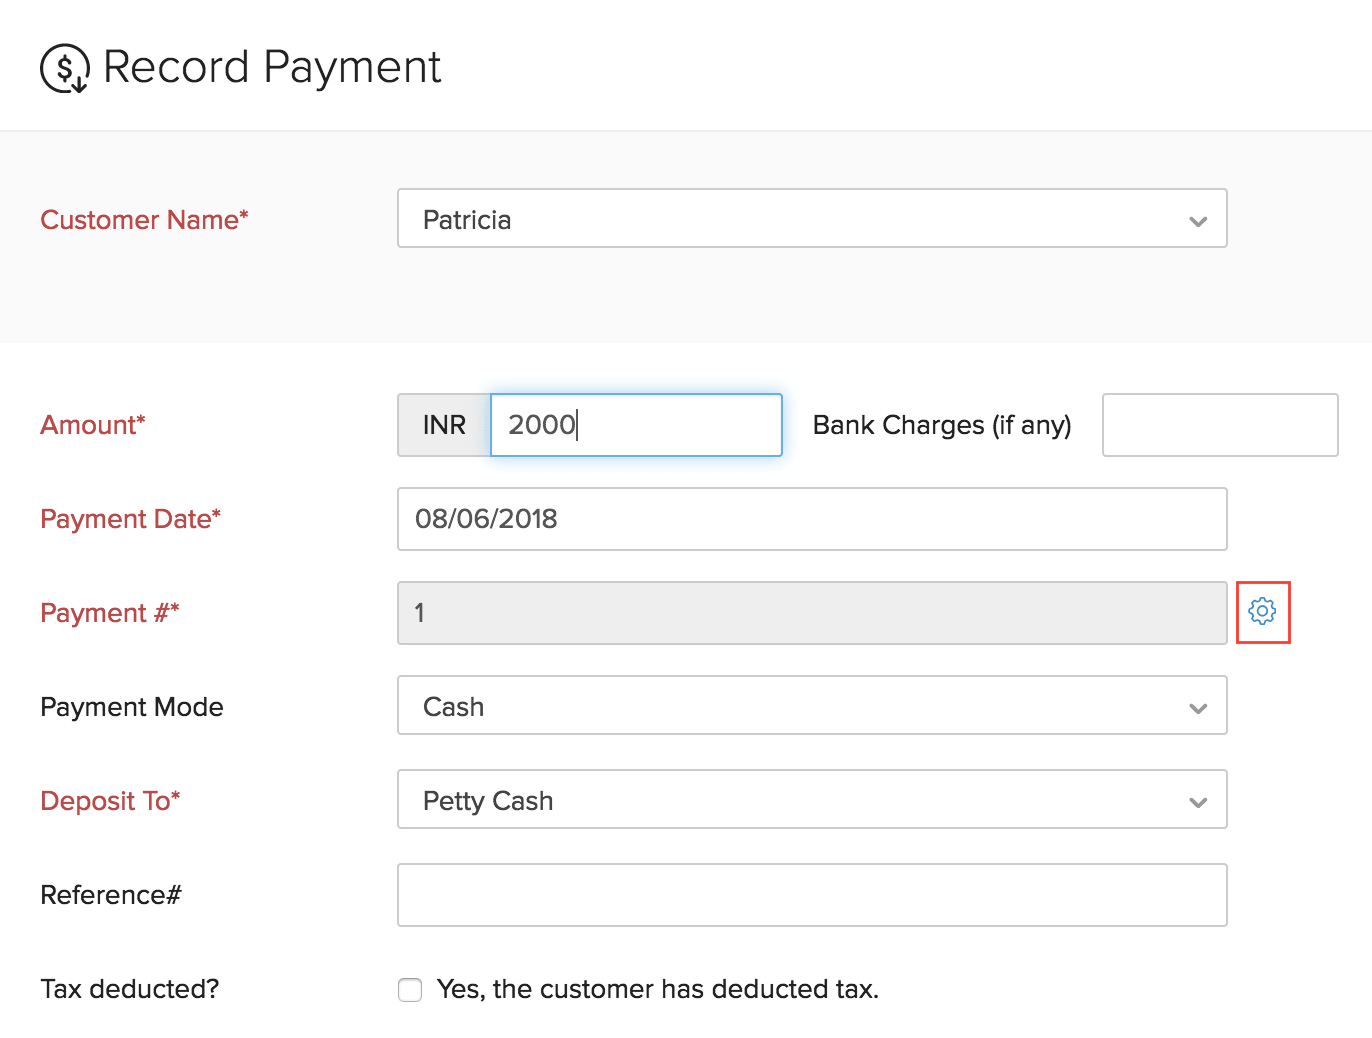 Auto-Generate Payment Numbers